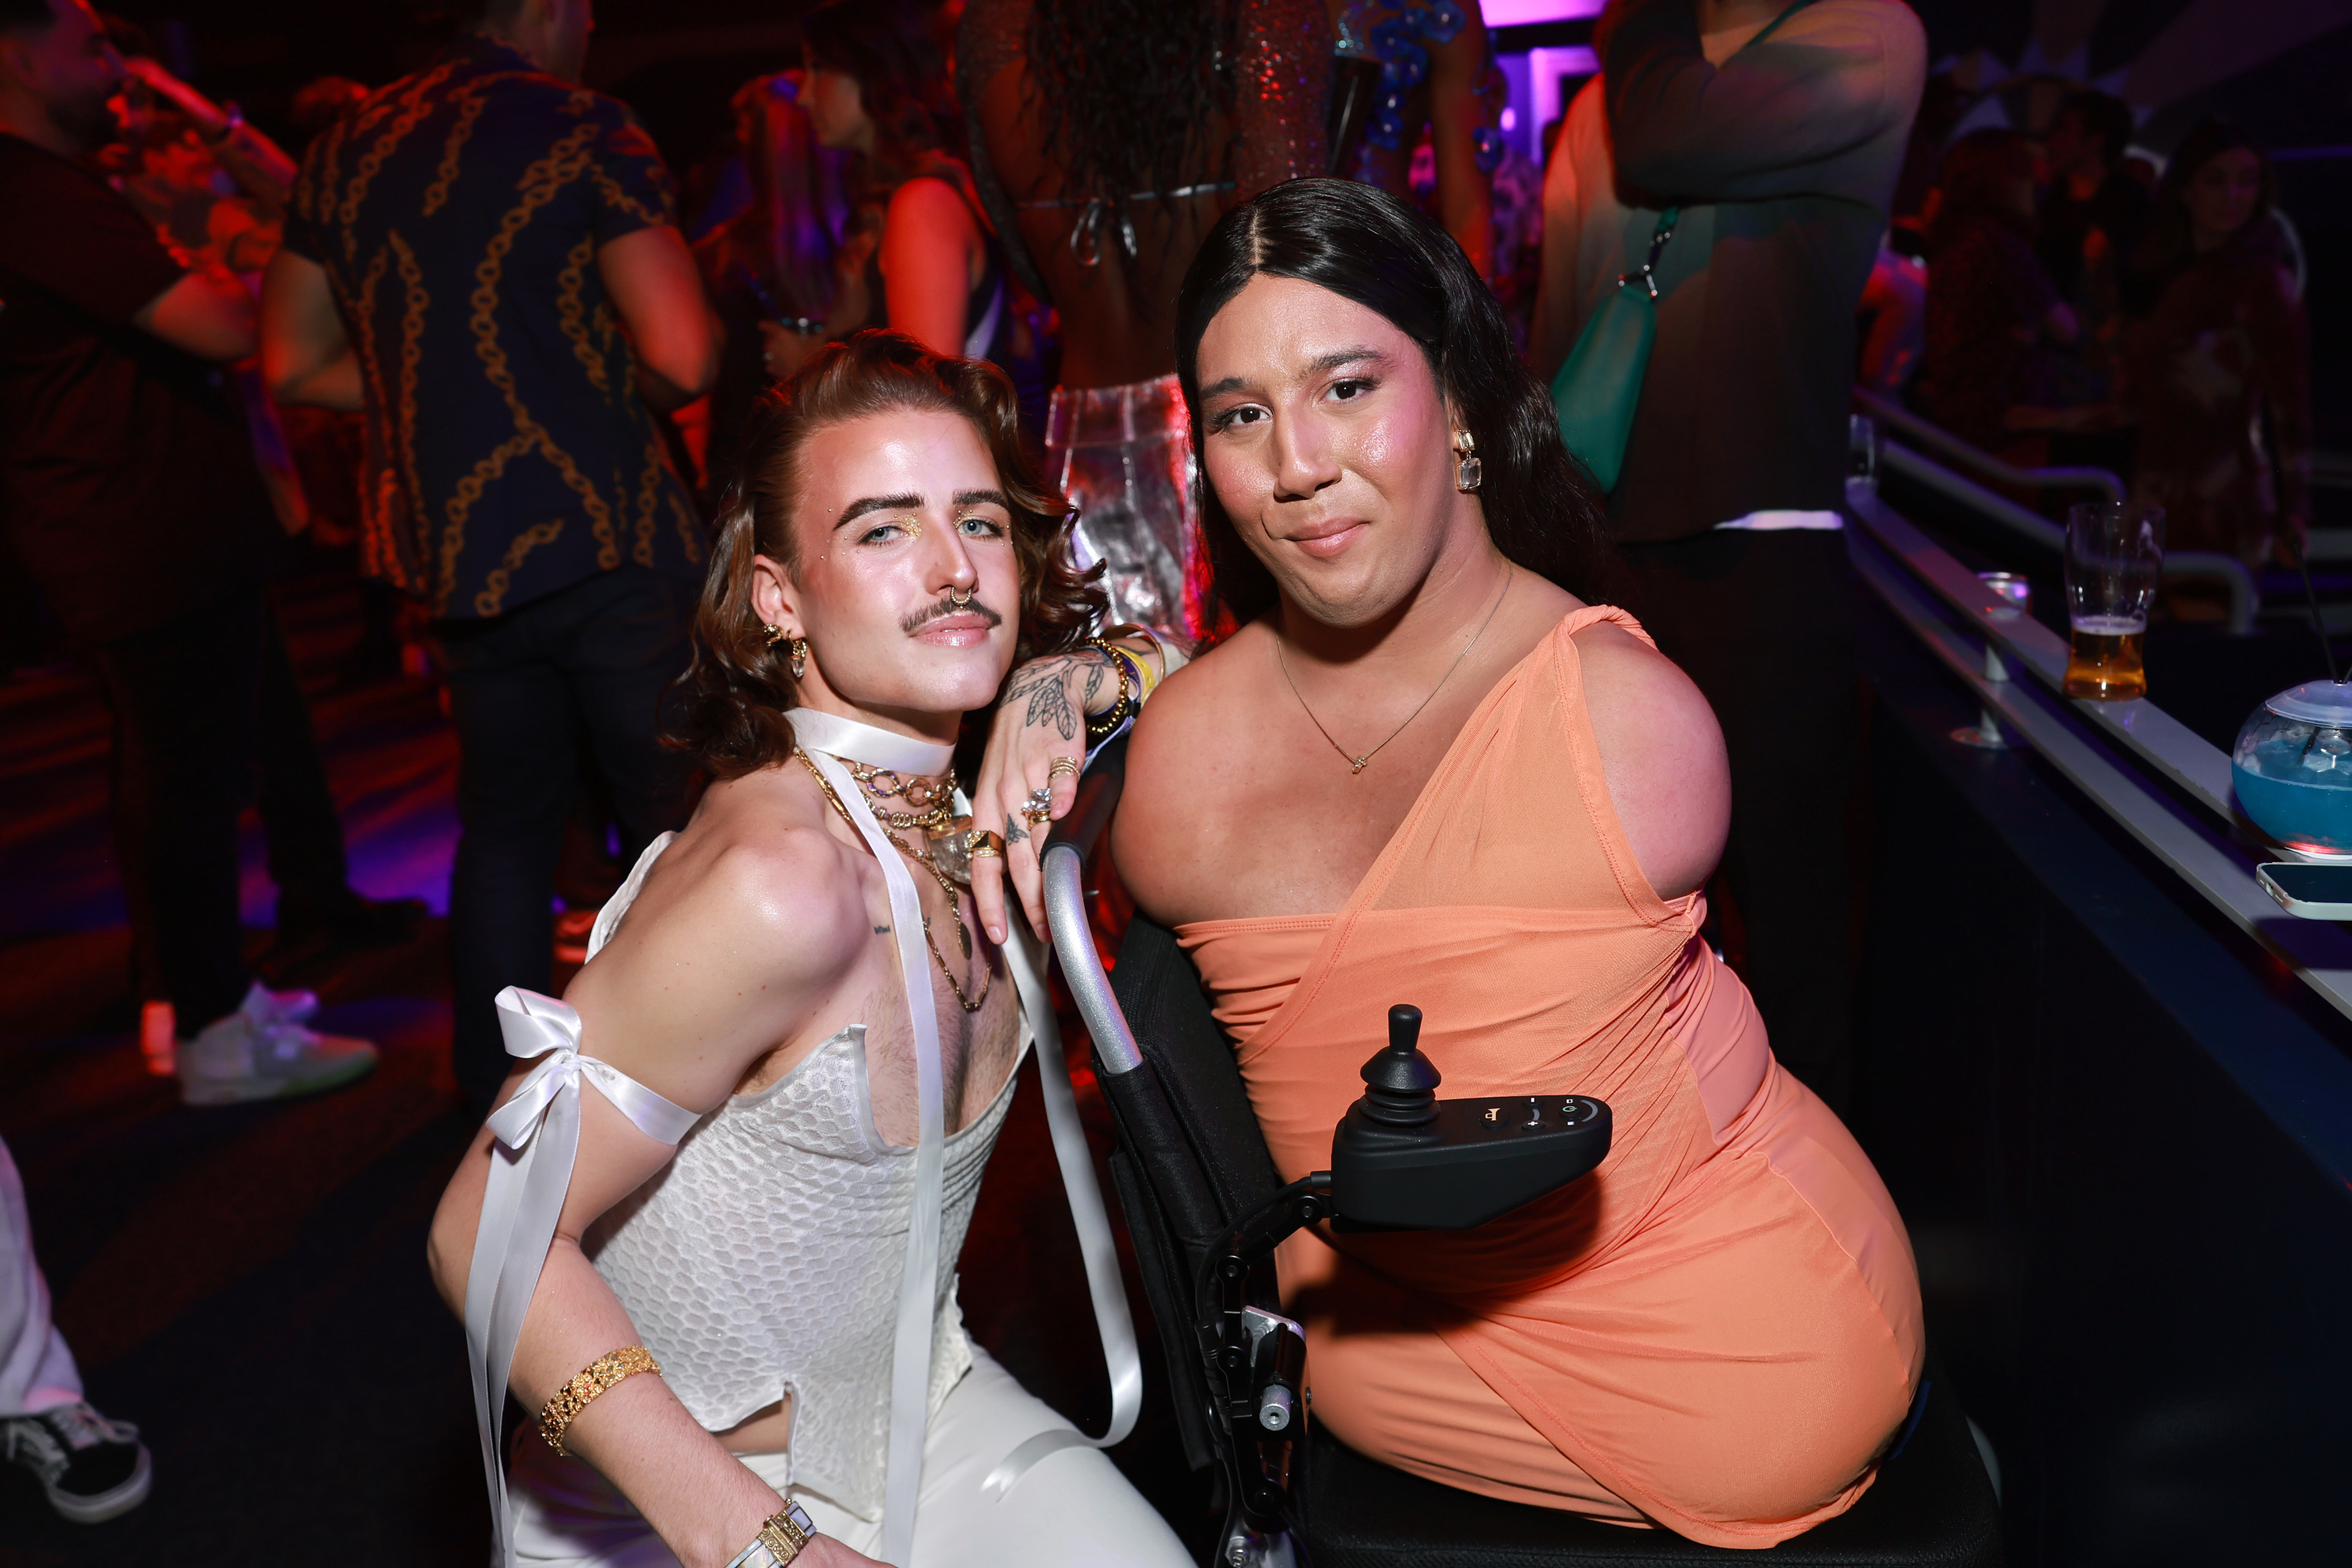 RJ Chumbley and Gabe Adams attend Instagram Night Out at VidCon 2023, photographed together on the dance floor in a silver and peach outfit respectively.